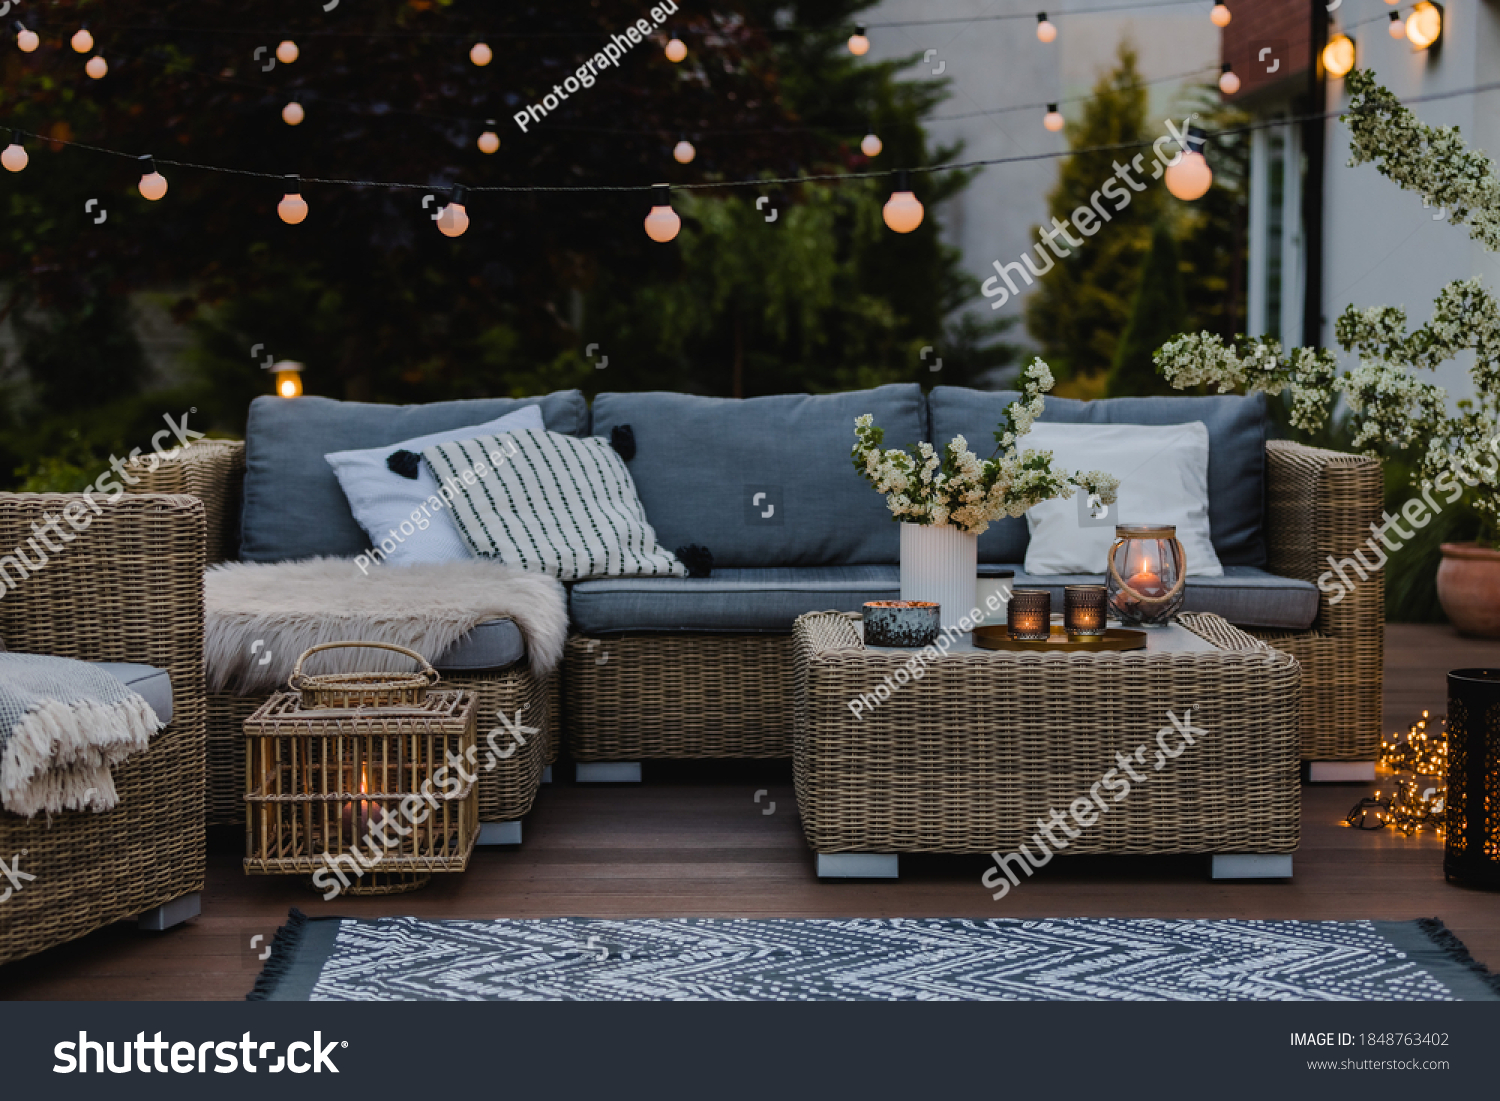 Summer evening on the patio of beautiful suburban house with garden #1848763402